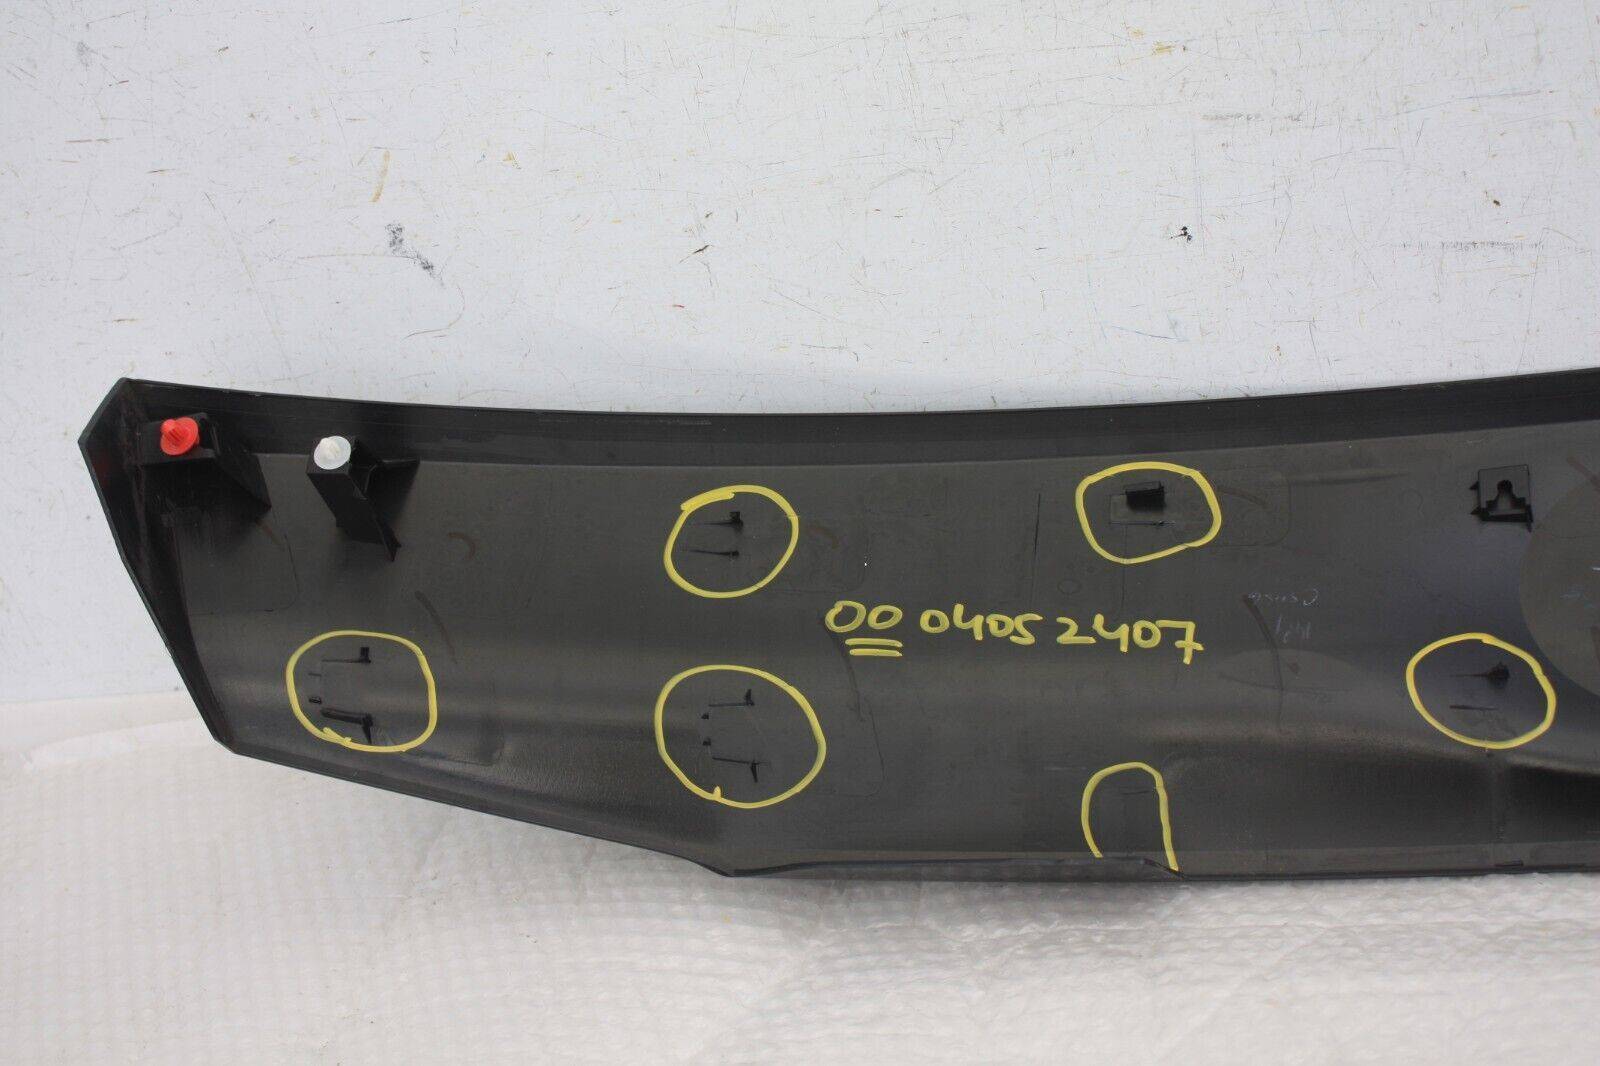 Nissan-Leaf-Rear-Tailgate-Trunk-Lid-Panel-Cover-Trim-90810-5SH0A-FIXING-DAMAGED-176365212247-16